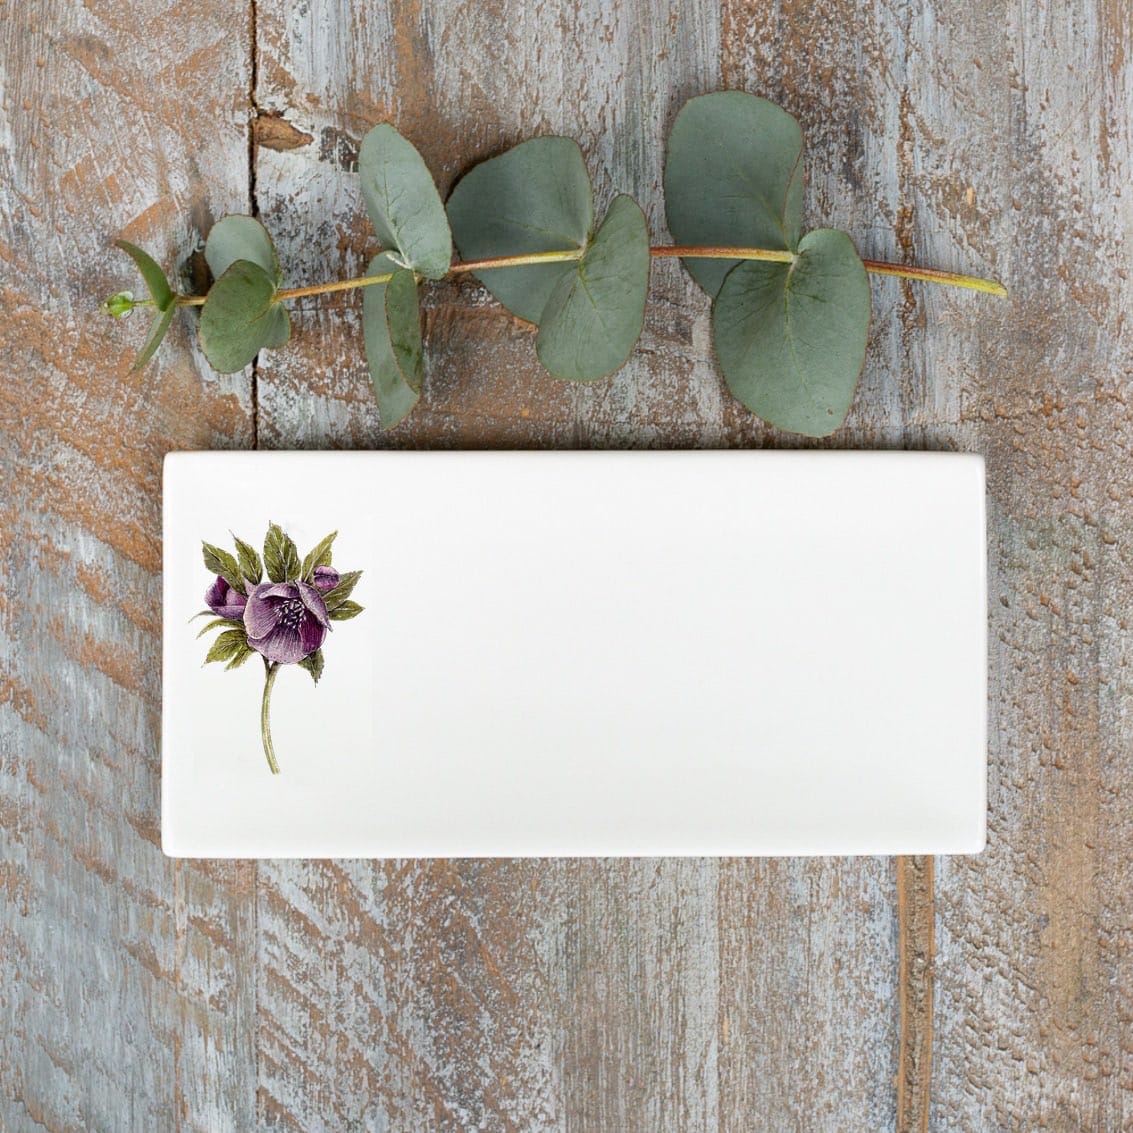 Load image into Gallery viewer, White rectangular soap dish with an illustration of a hellebore flower, photographed birds-eye view on a wooden surface
